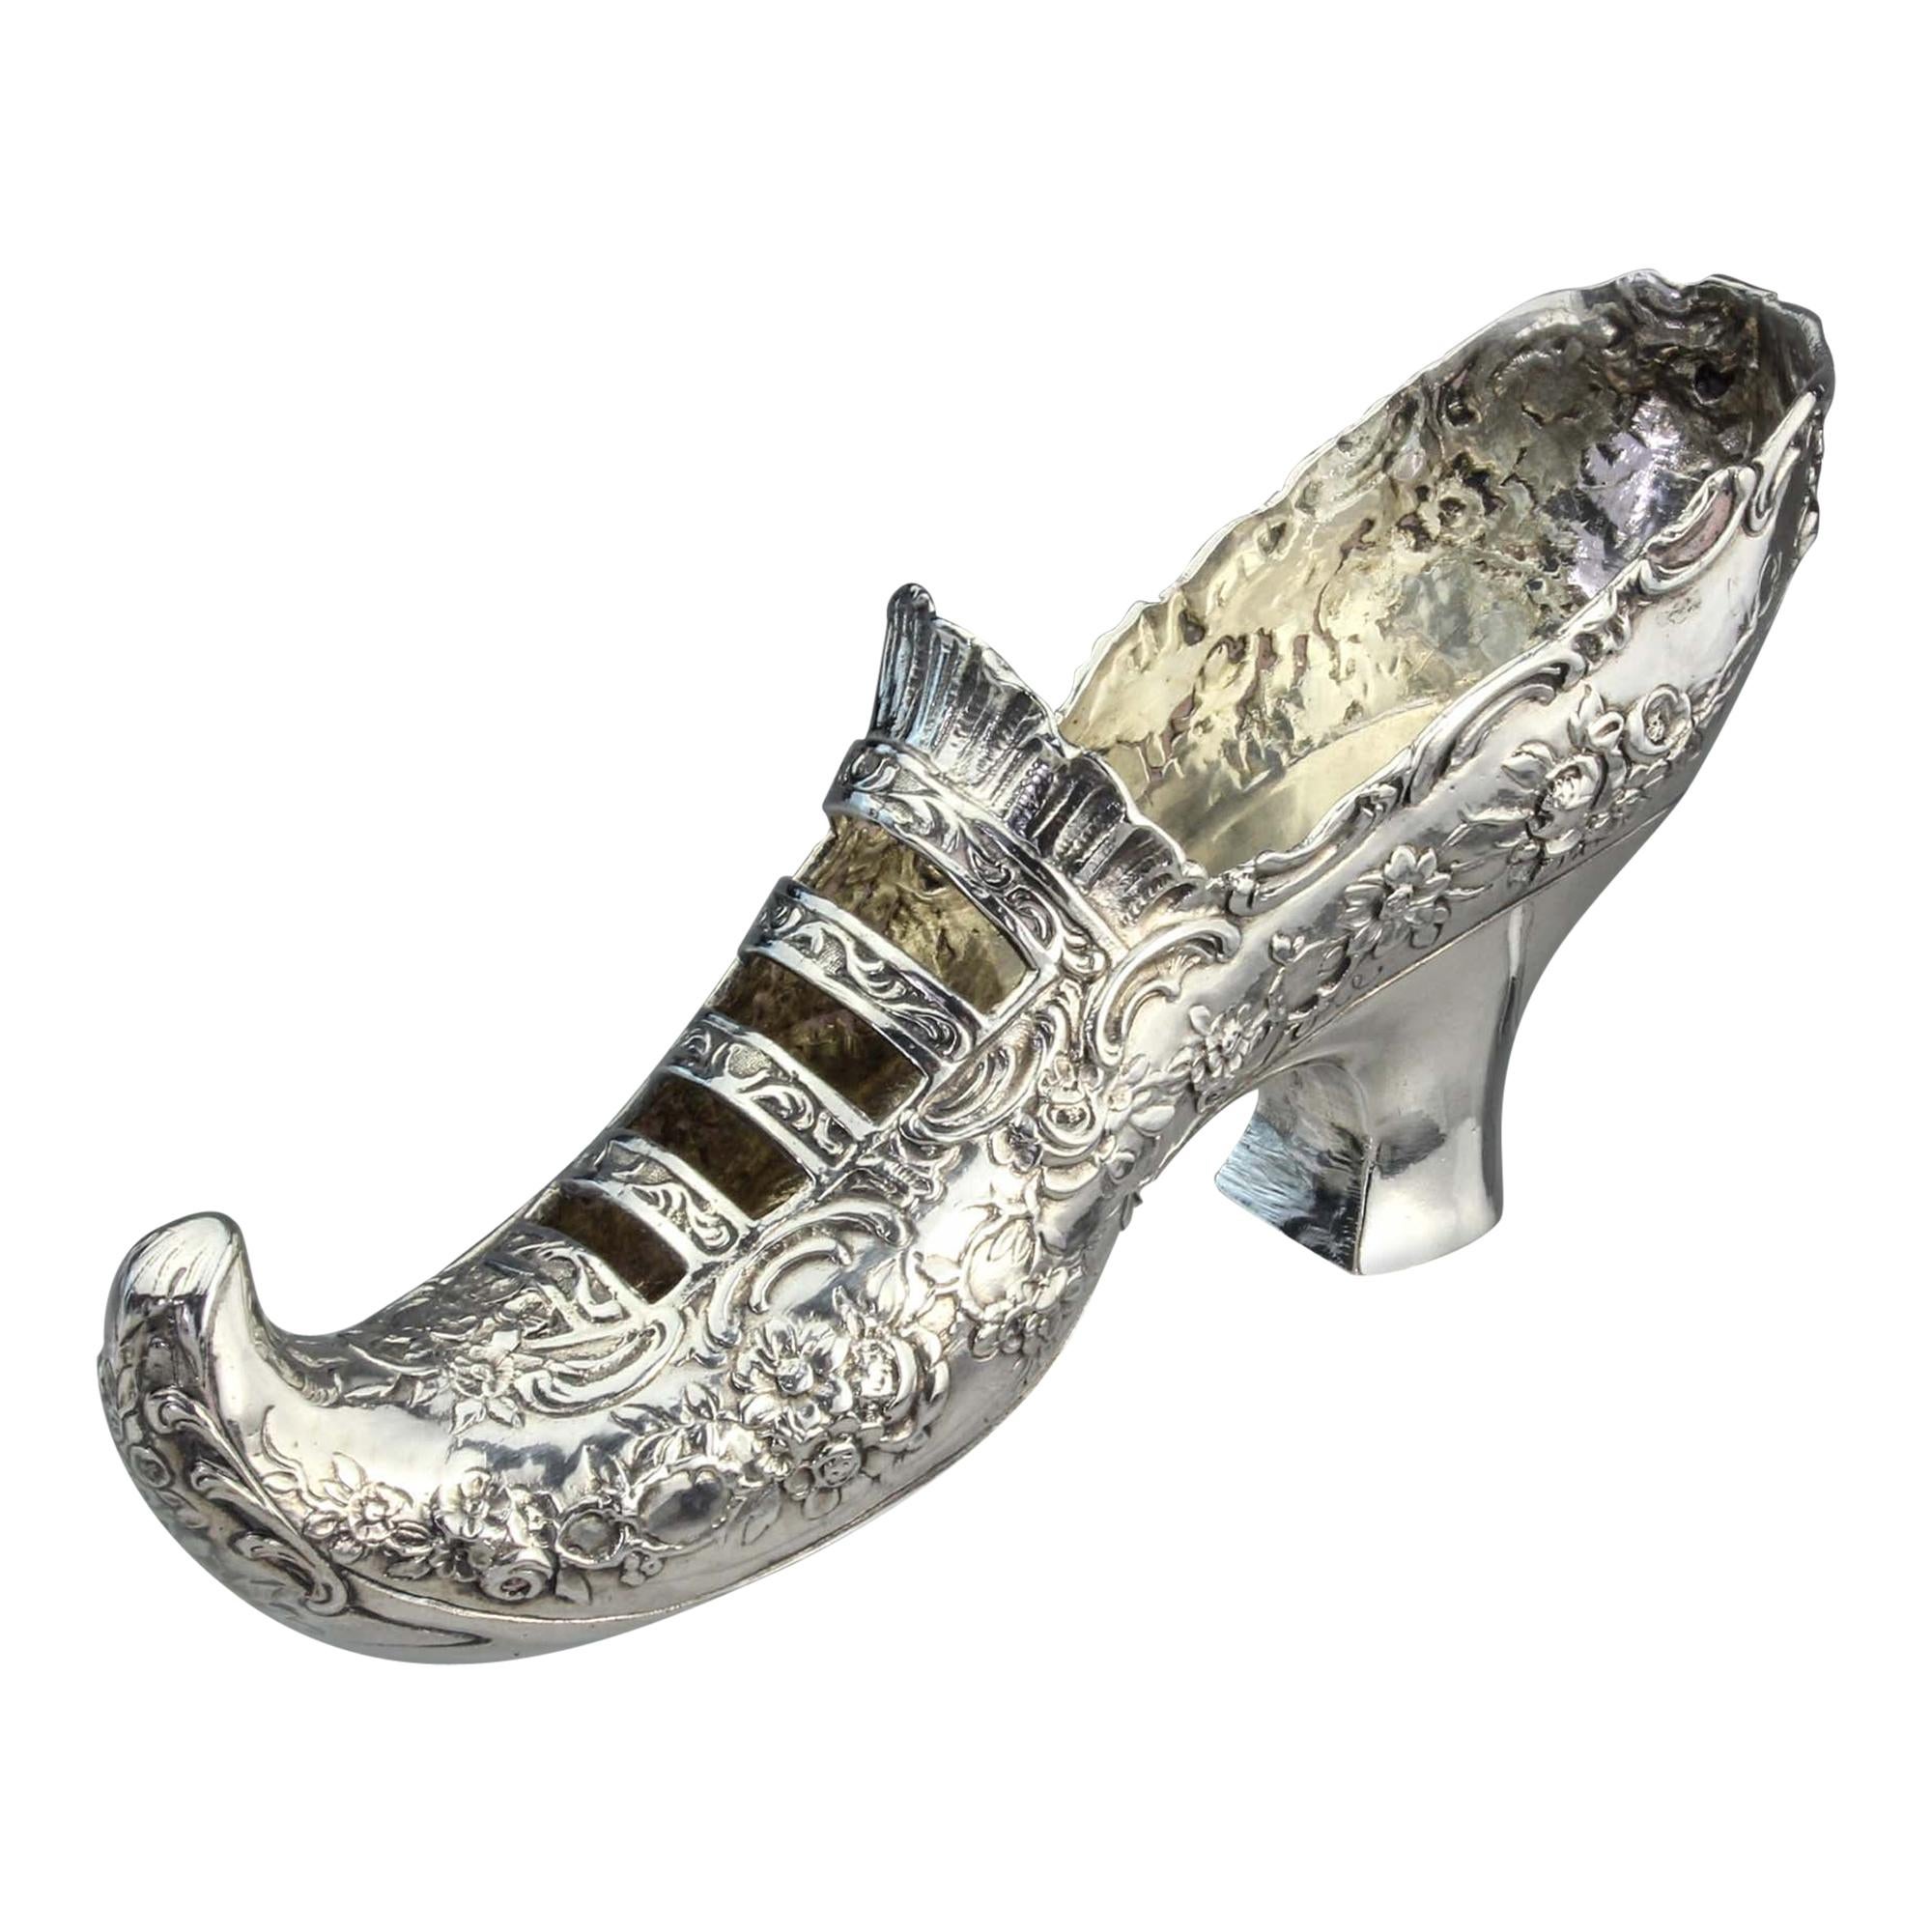 Antique Late 19th Century German 930, Silver Rococo Lady's Shoe with Elf Toe